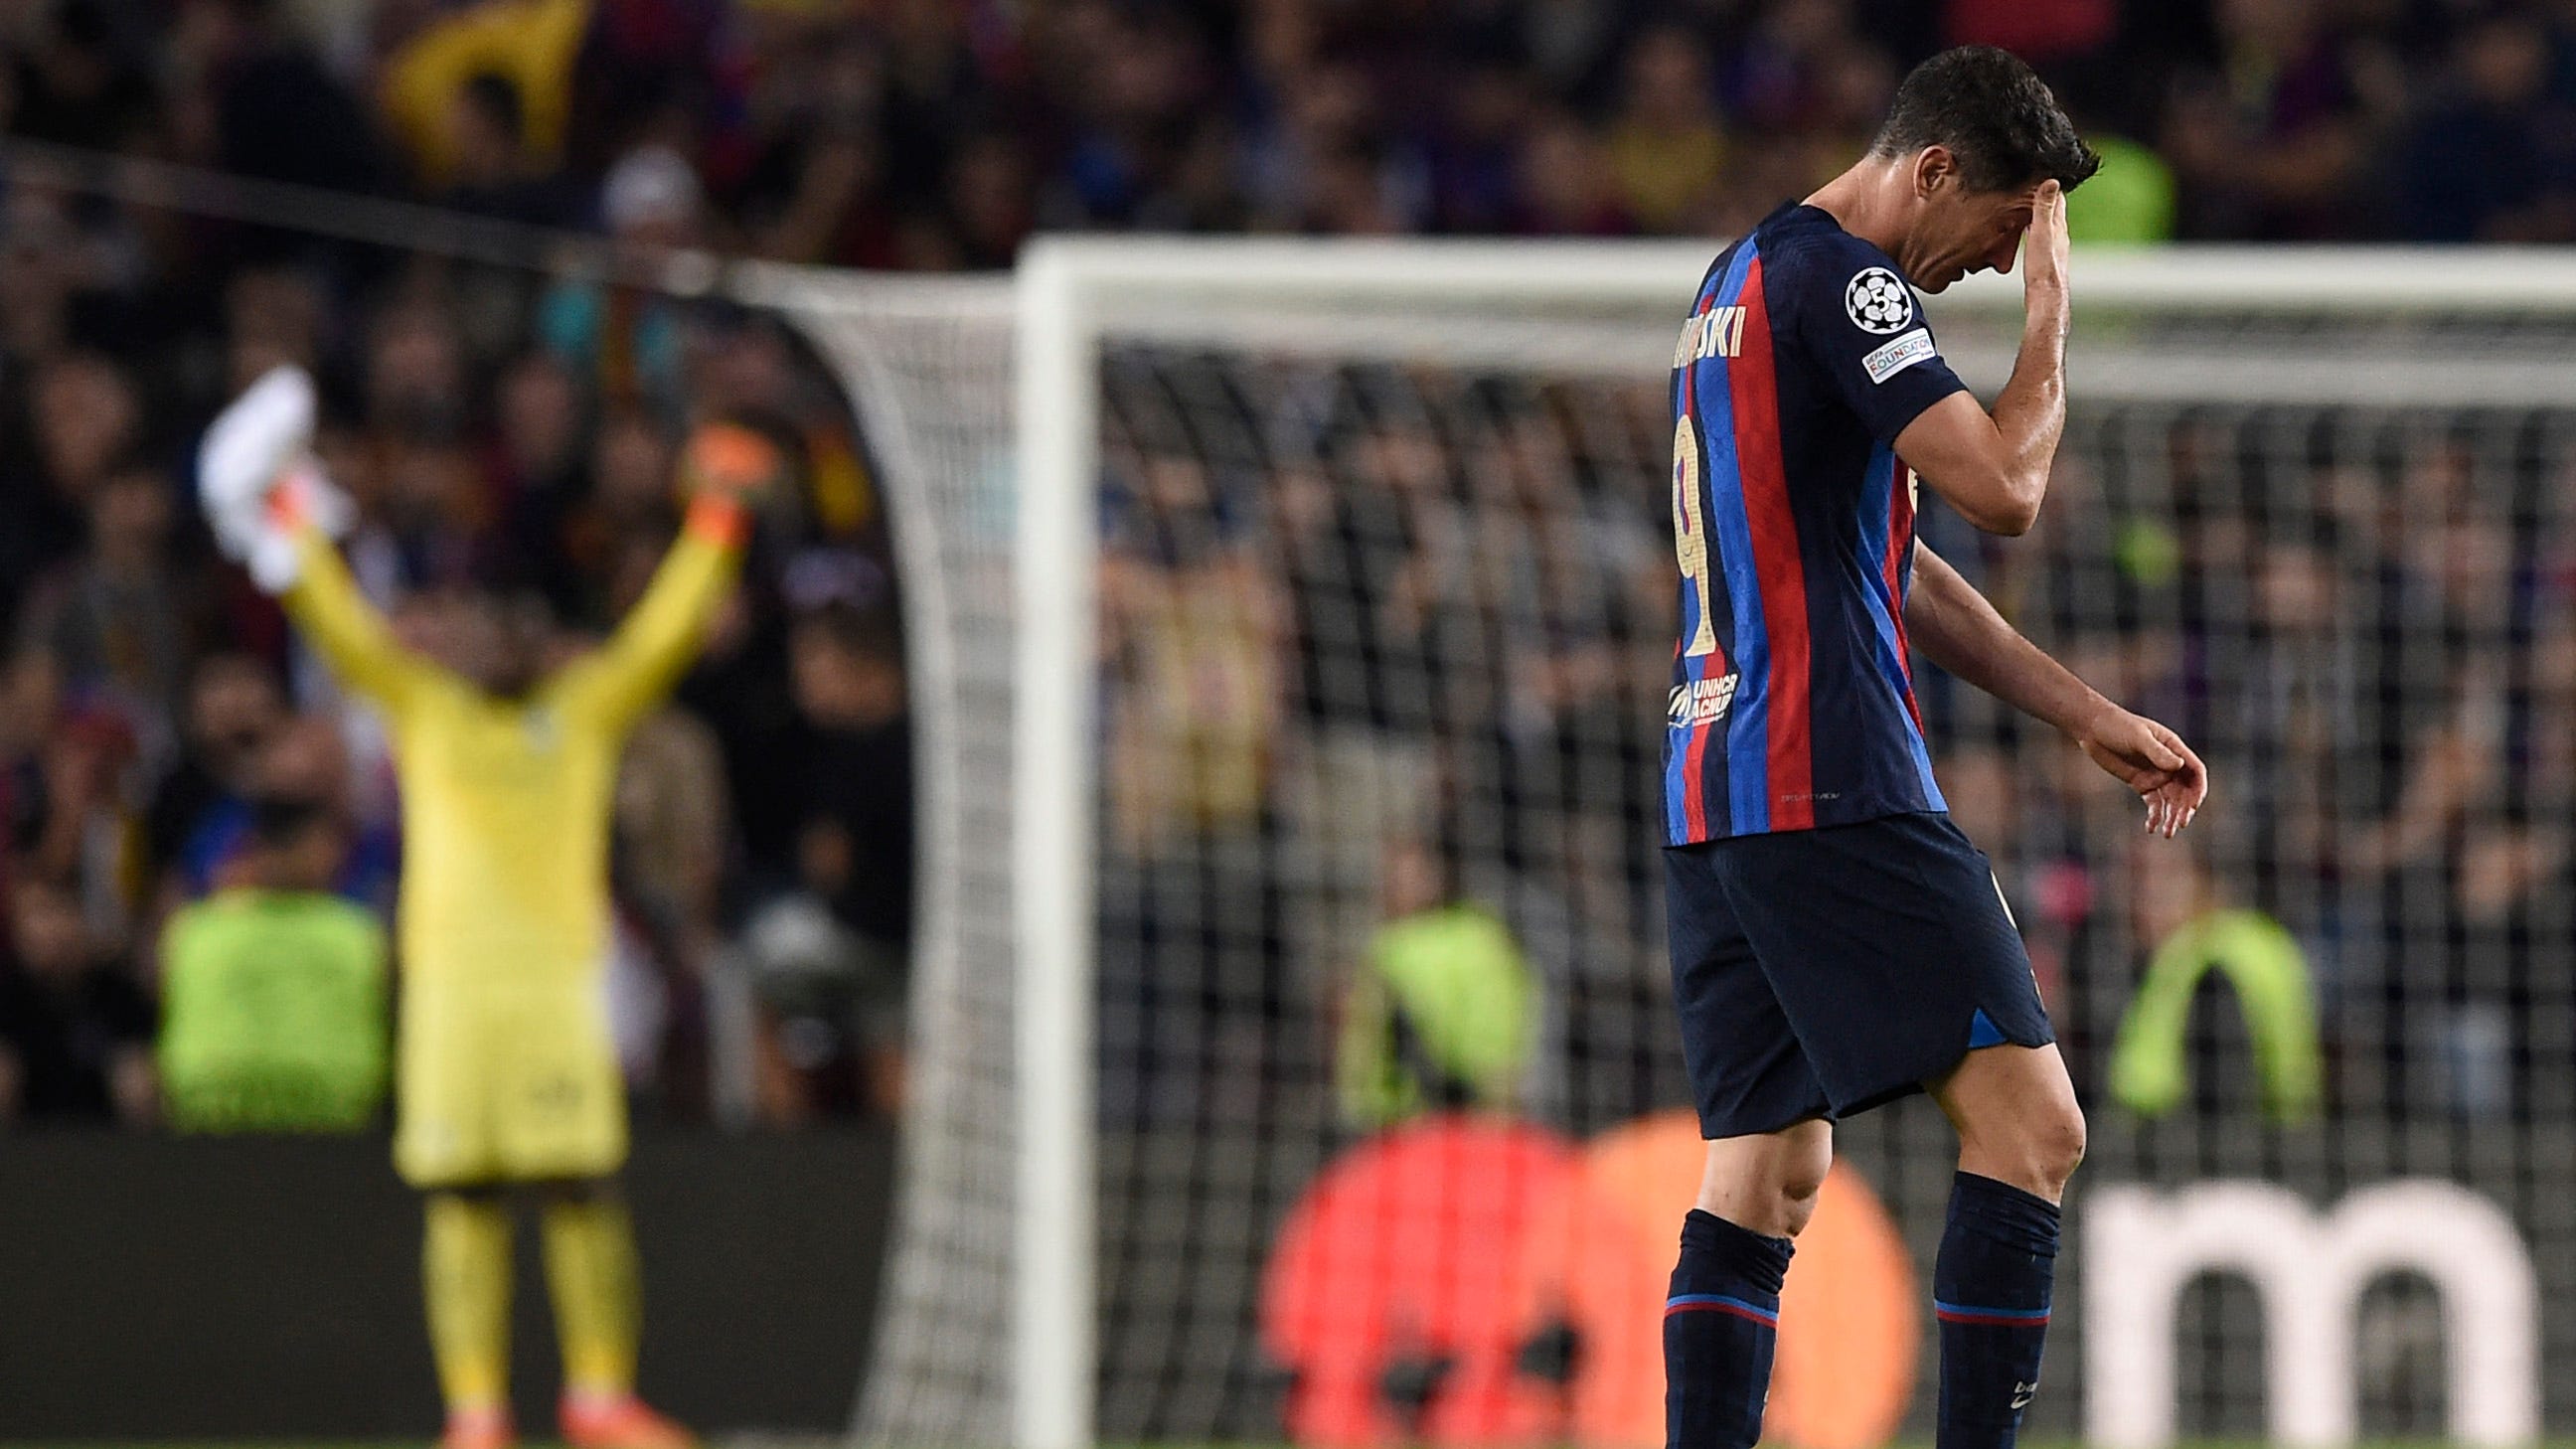 Barcelona pulls off thrilling comeback to win Champions League title